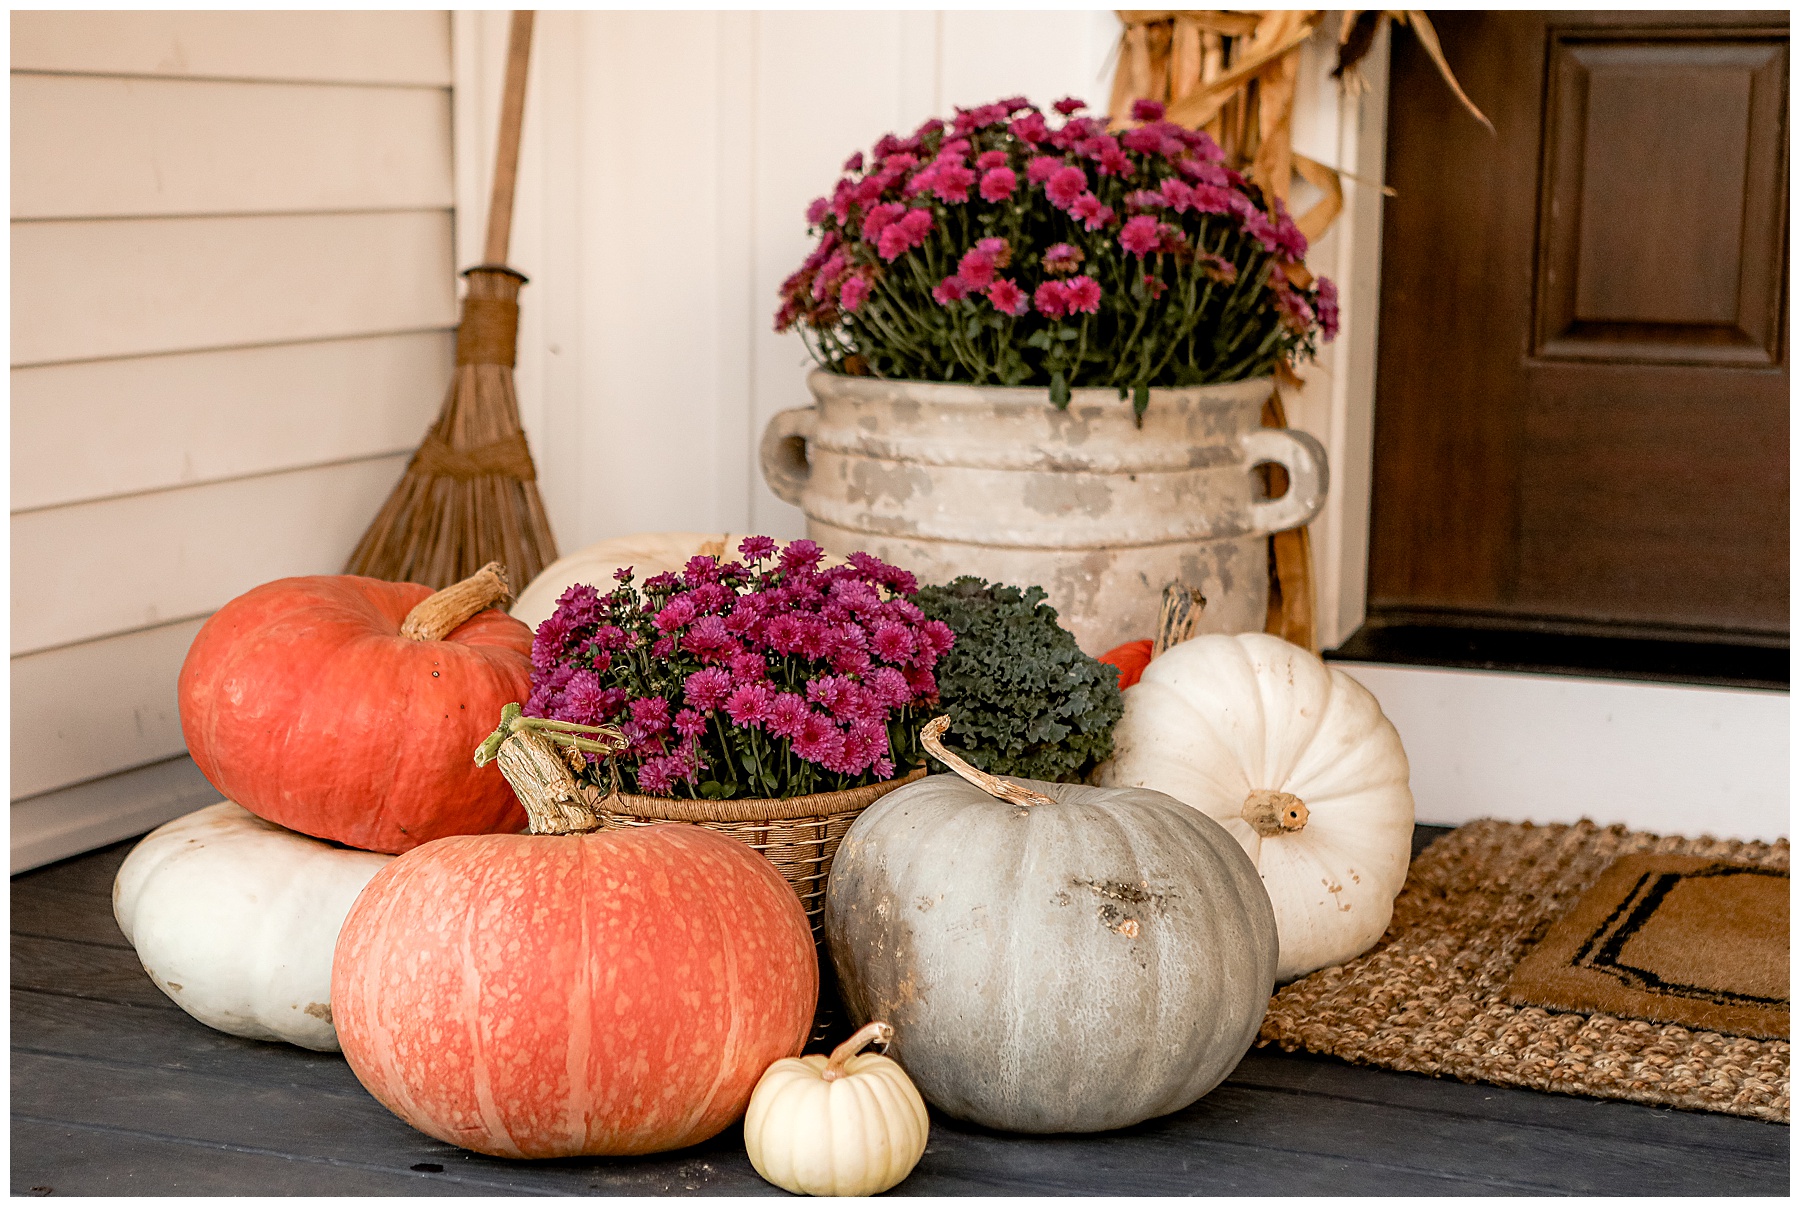 Pumpkins and flowers on porch